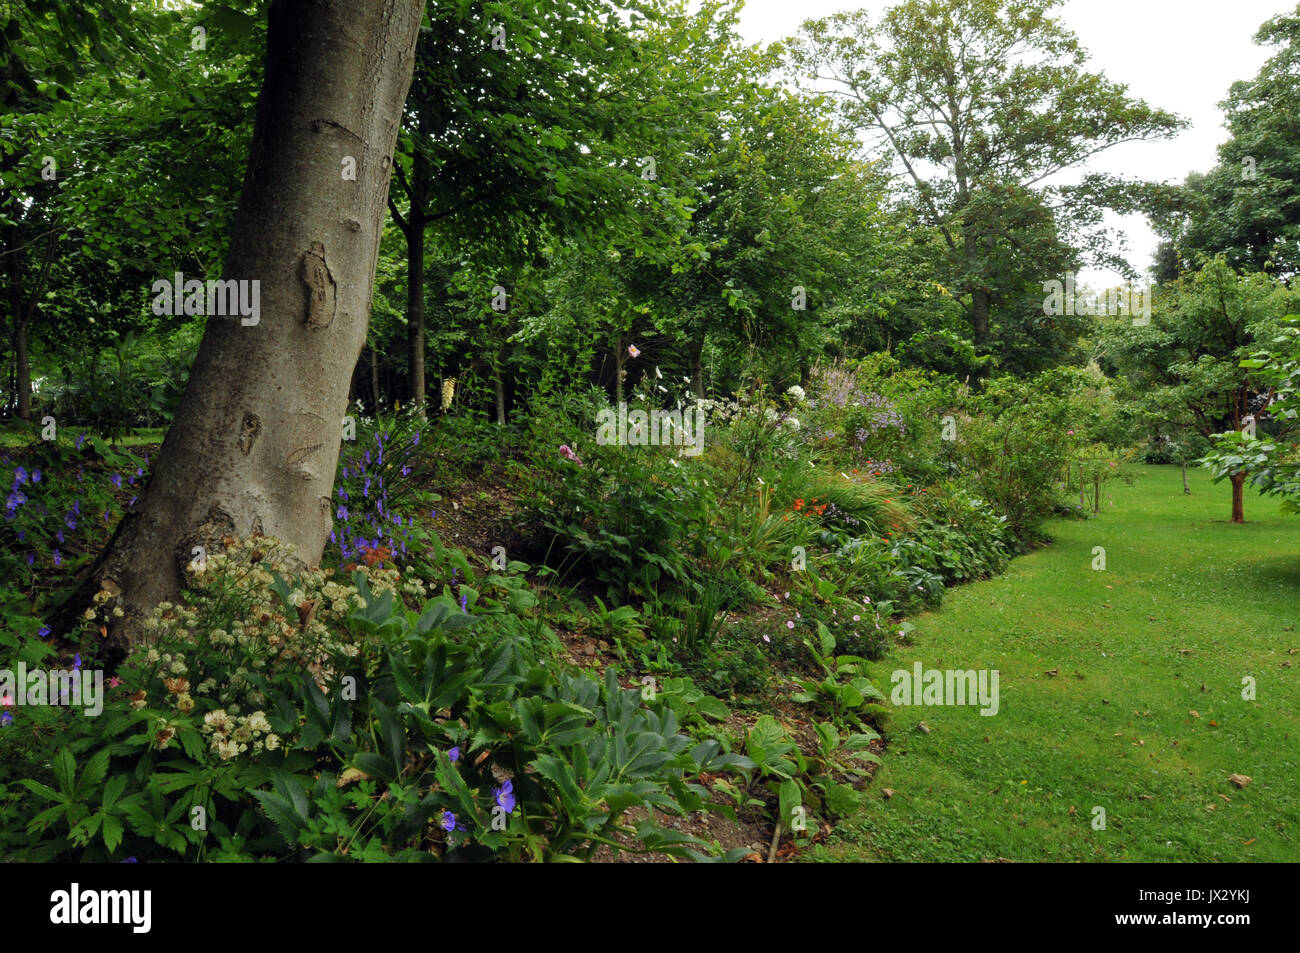 the landscaped gardens and avenues of trees at prideaux place manor house in padstow on the north Cornish coastline. Stock Photo